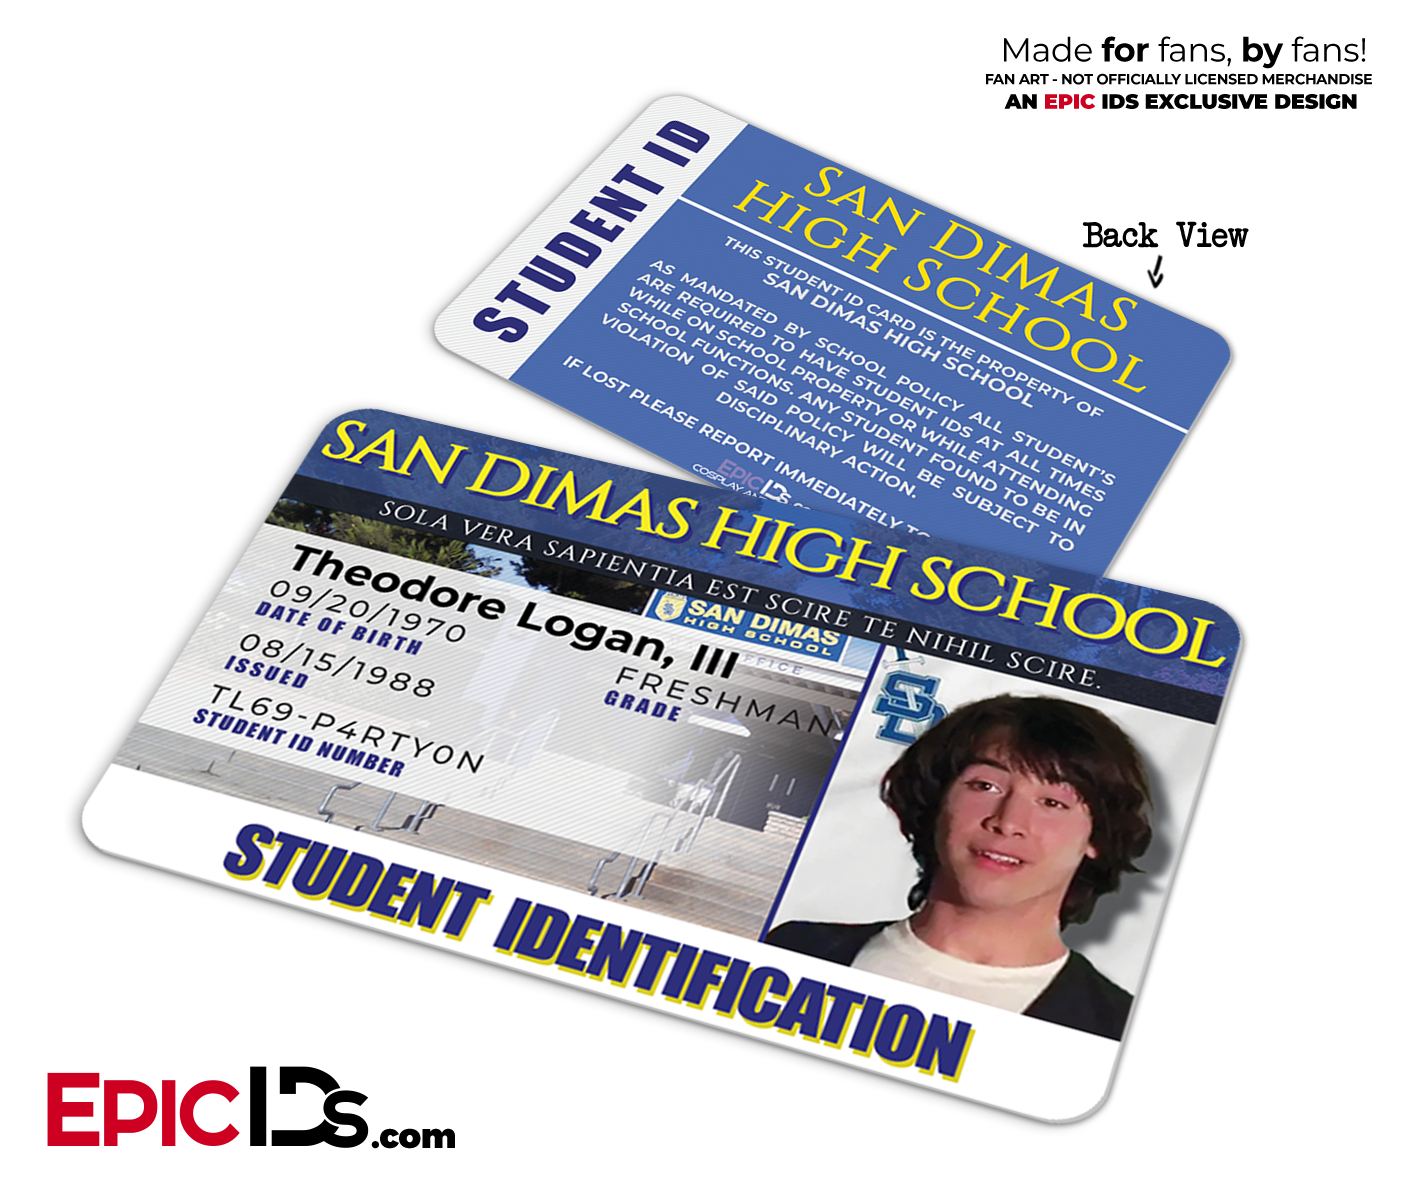 Bill and Ted's Excellent Adventure San Dimas High School Student ID - Ted Logan